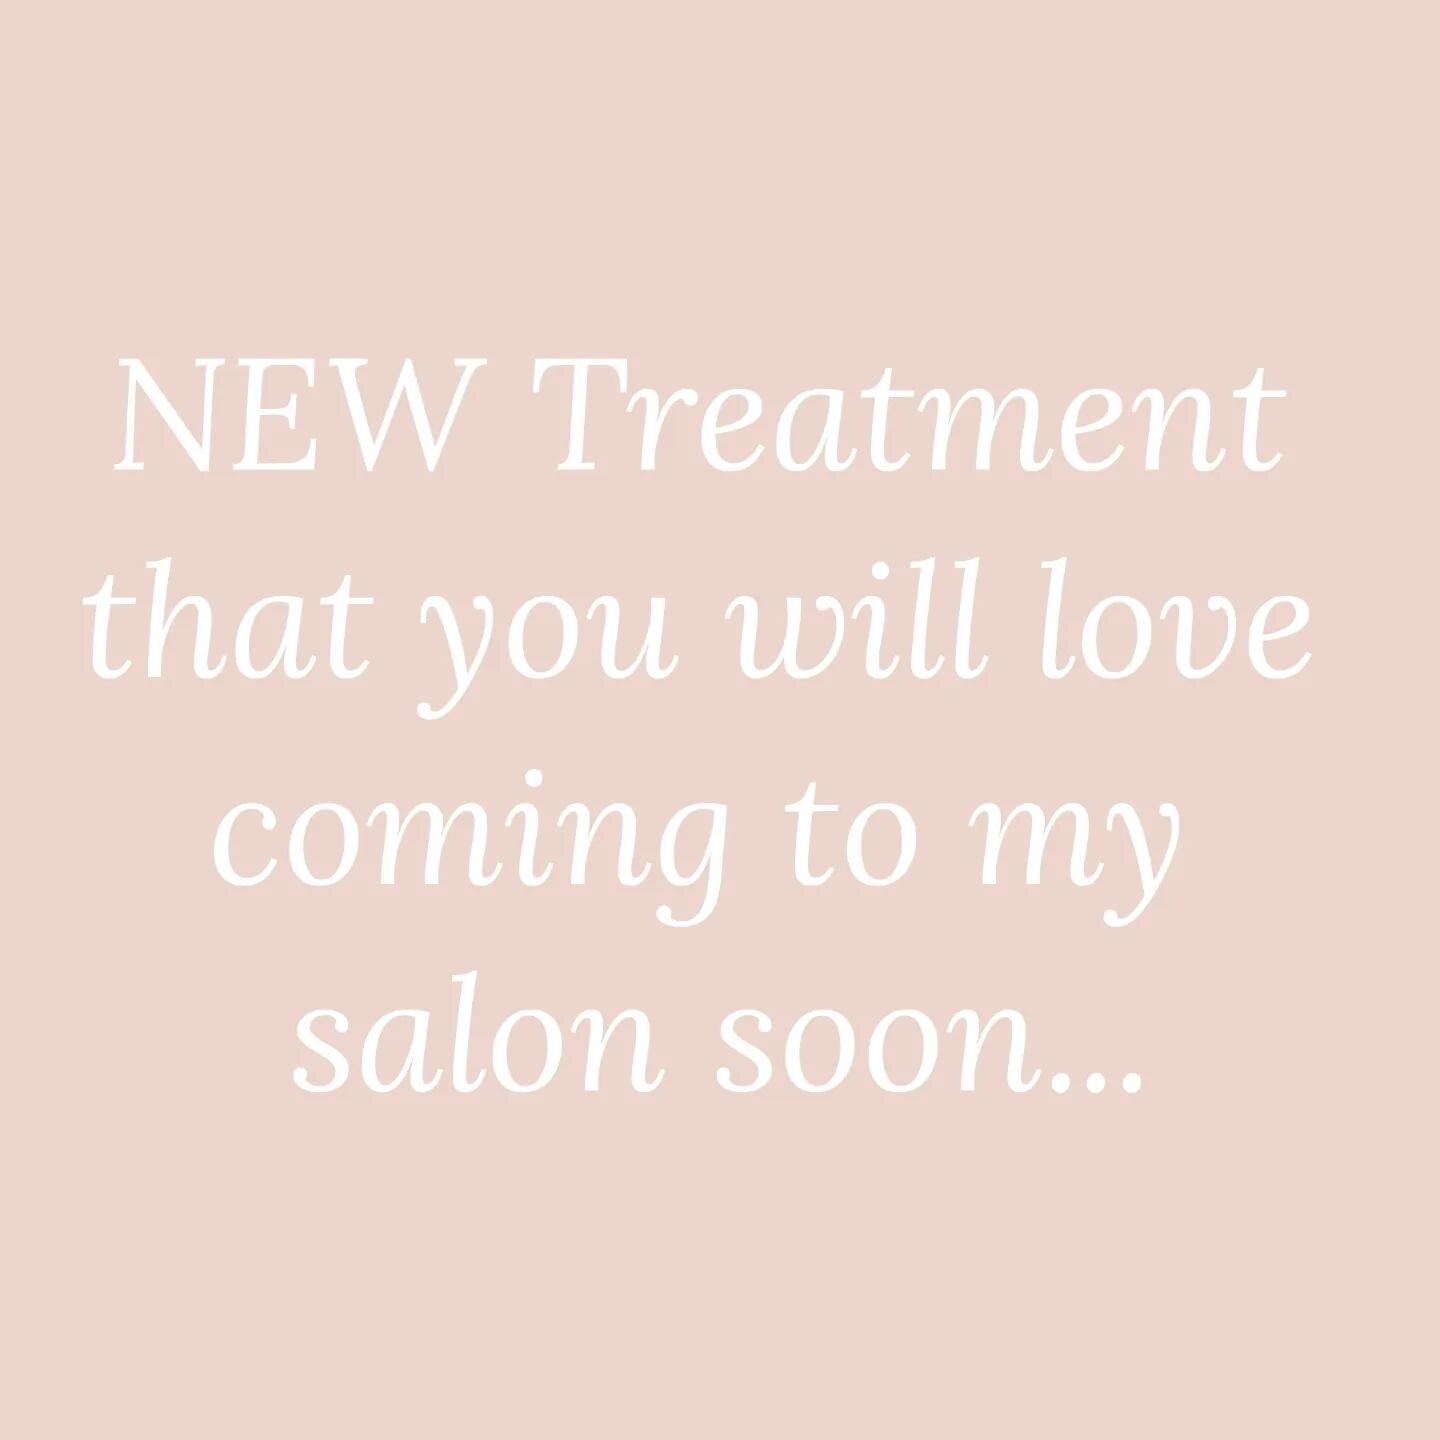 I'm very excited to announce brand new, revolutionary treatment coming to my salon next Friday, 21st of April.
This has been in the works for quite some time, I can not wait to tell you all about it soon 🥰

#newtreatment #beauty #beautysalon #bright